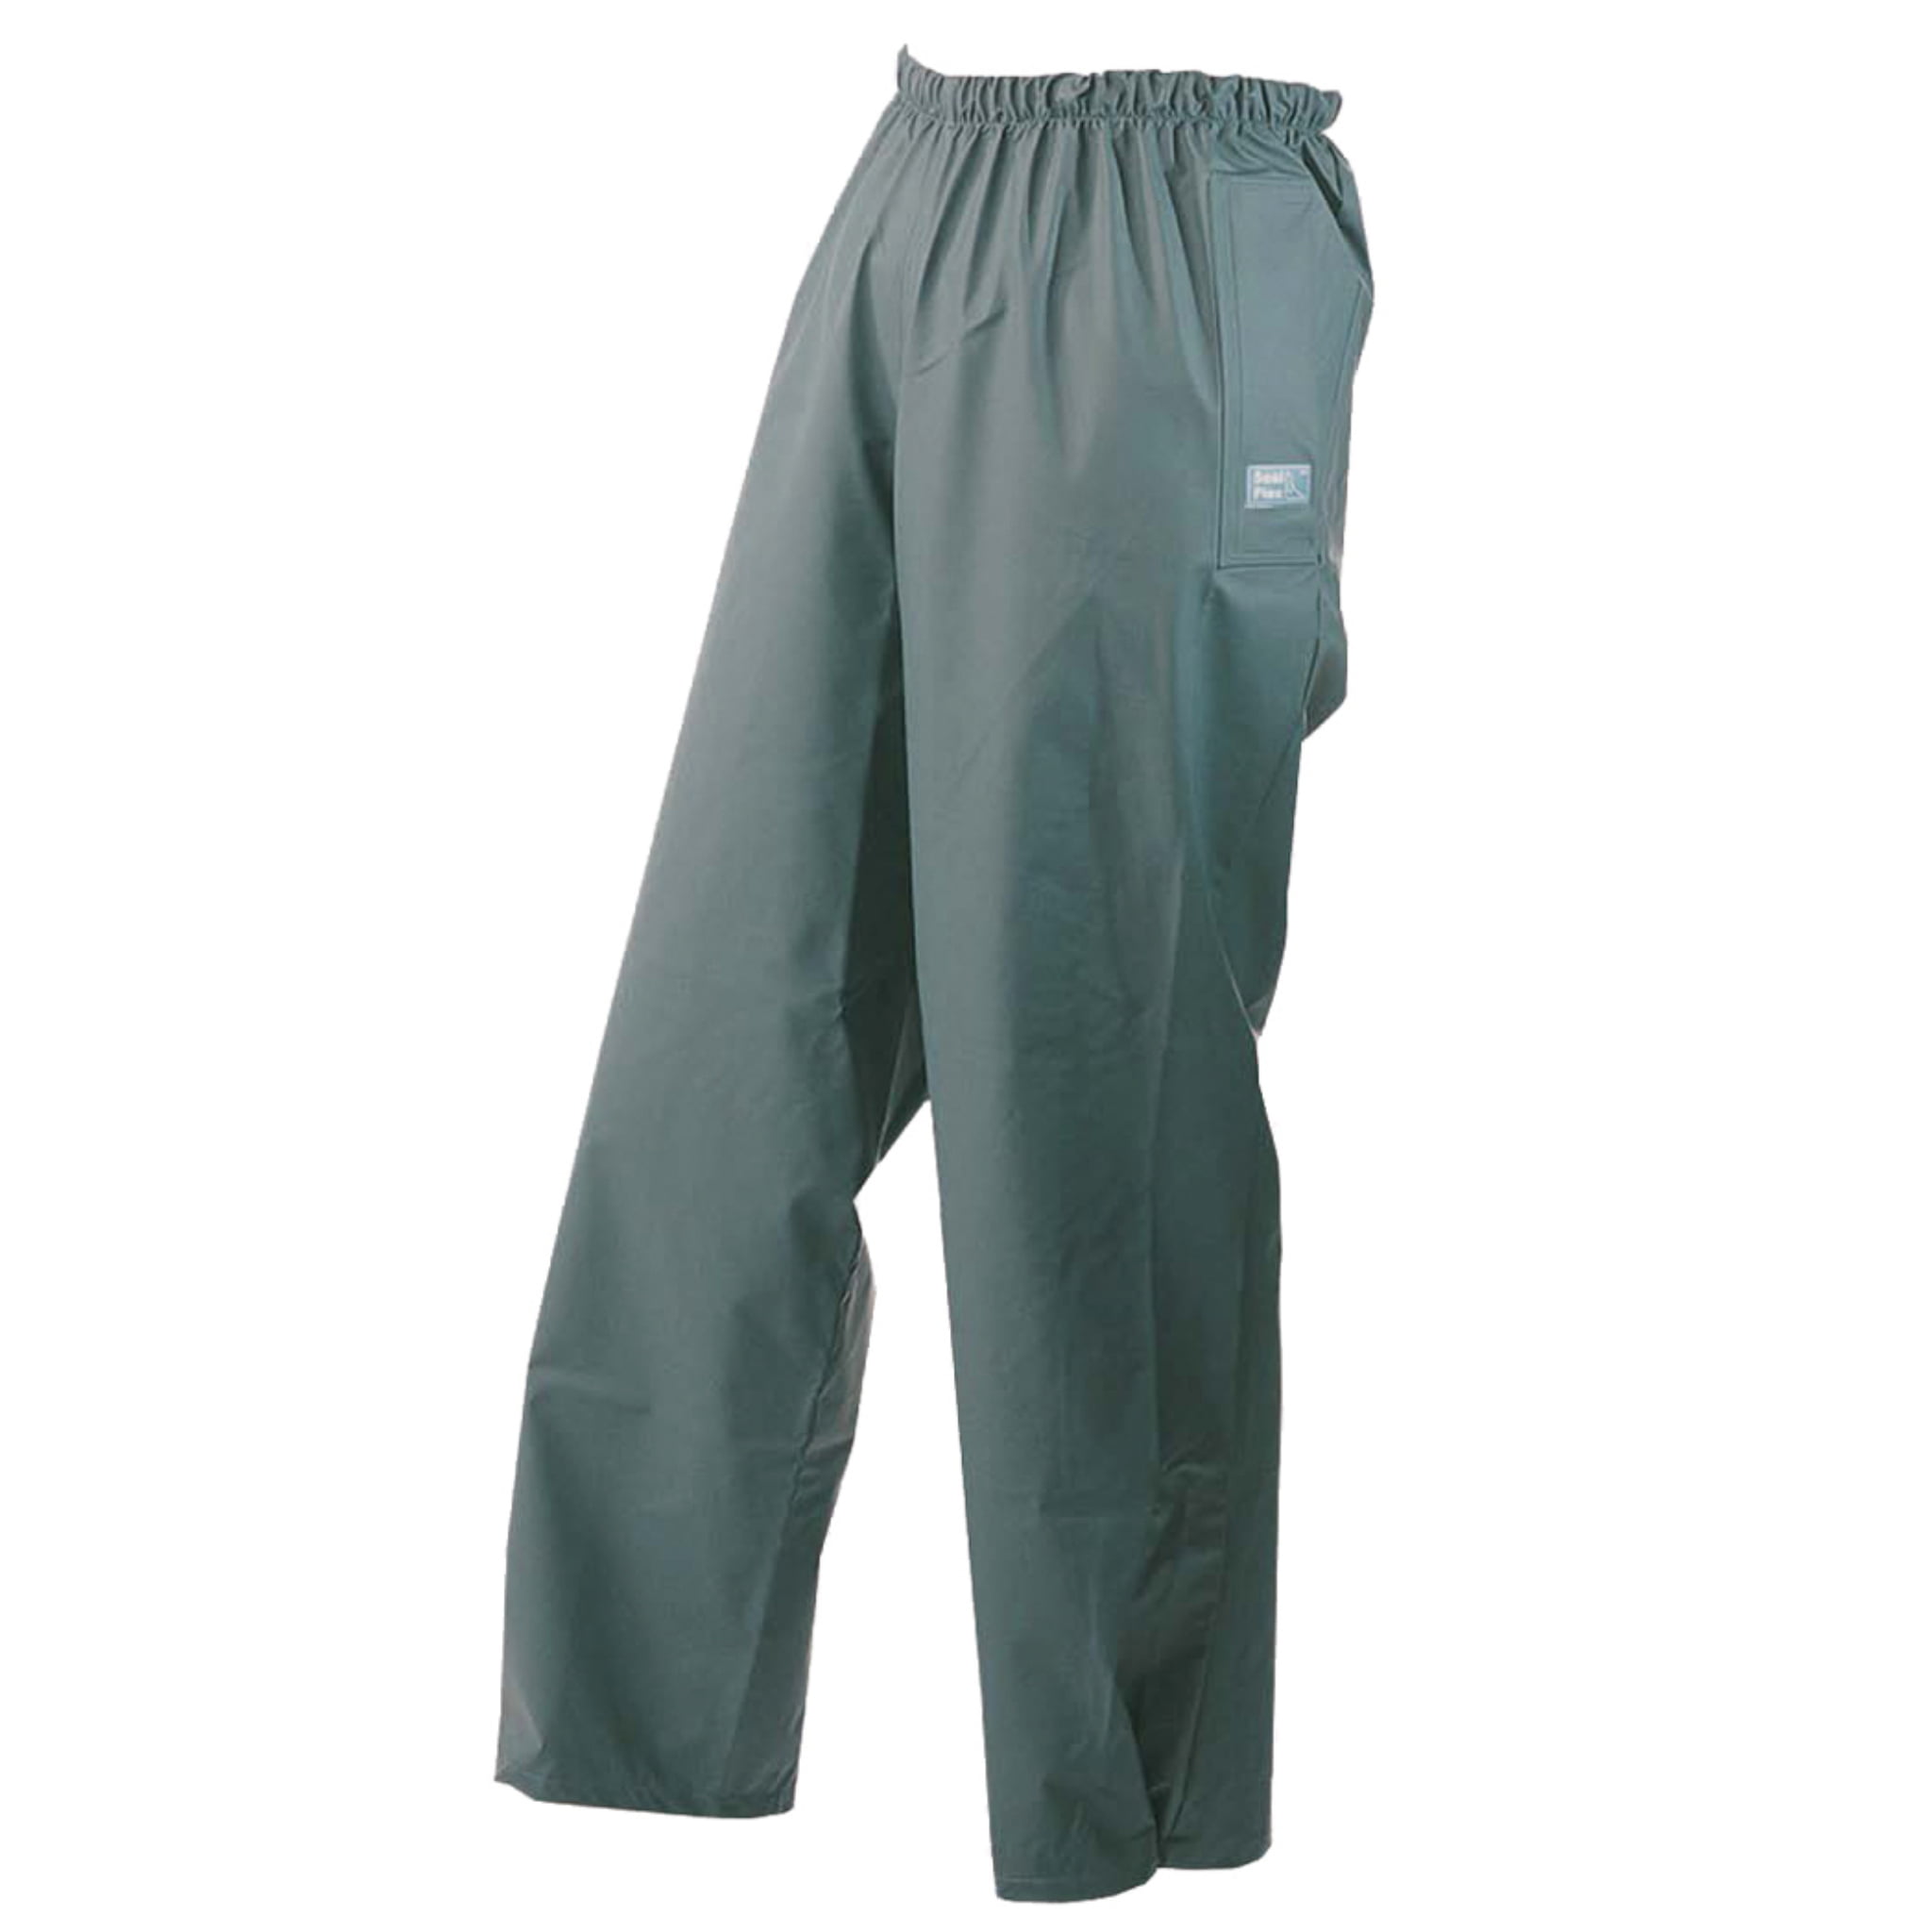 Details about   Seals Stormshield Waterproof Over Trousers Agriculture 